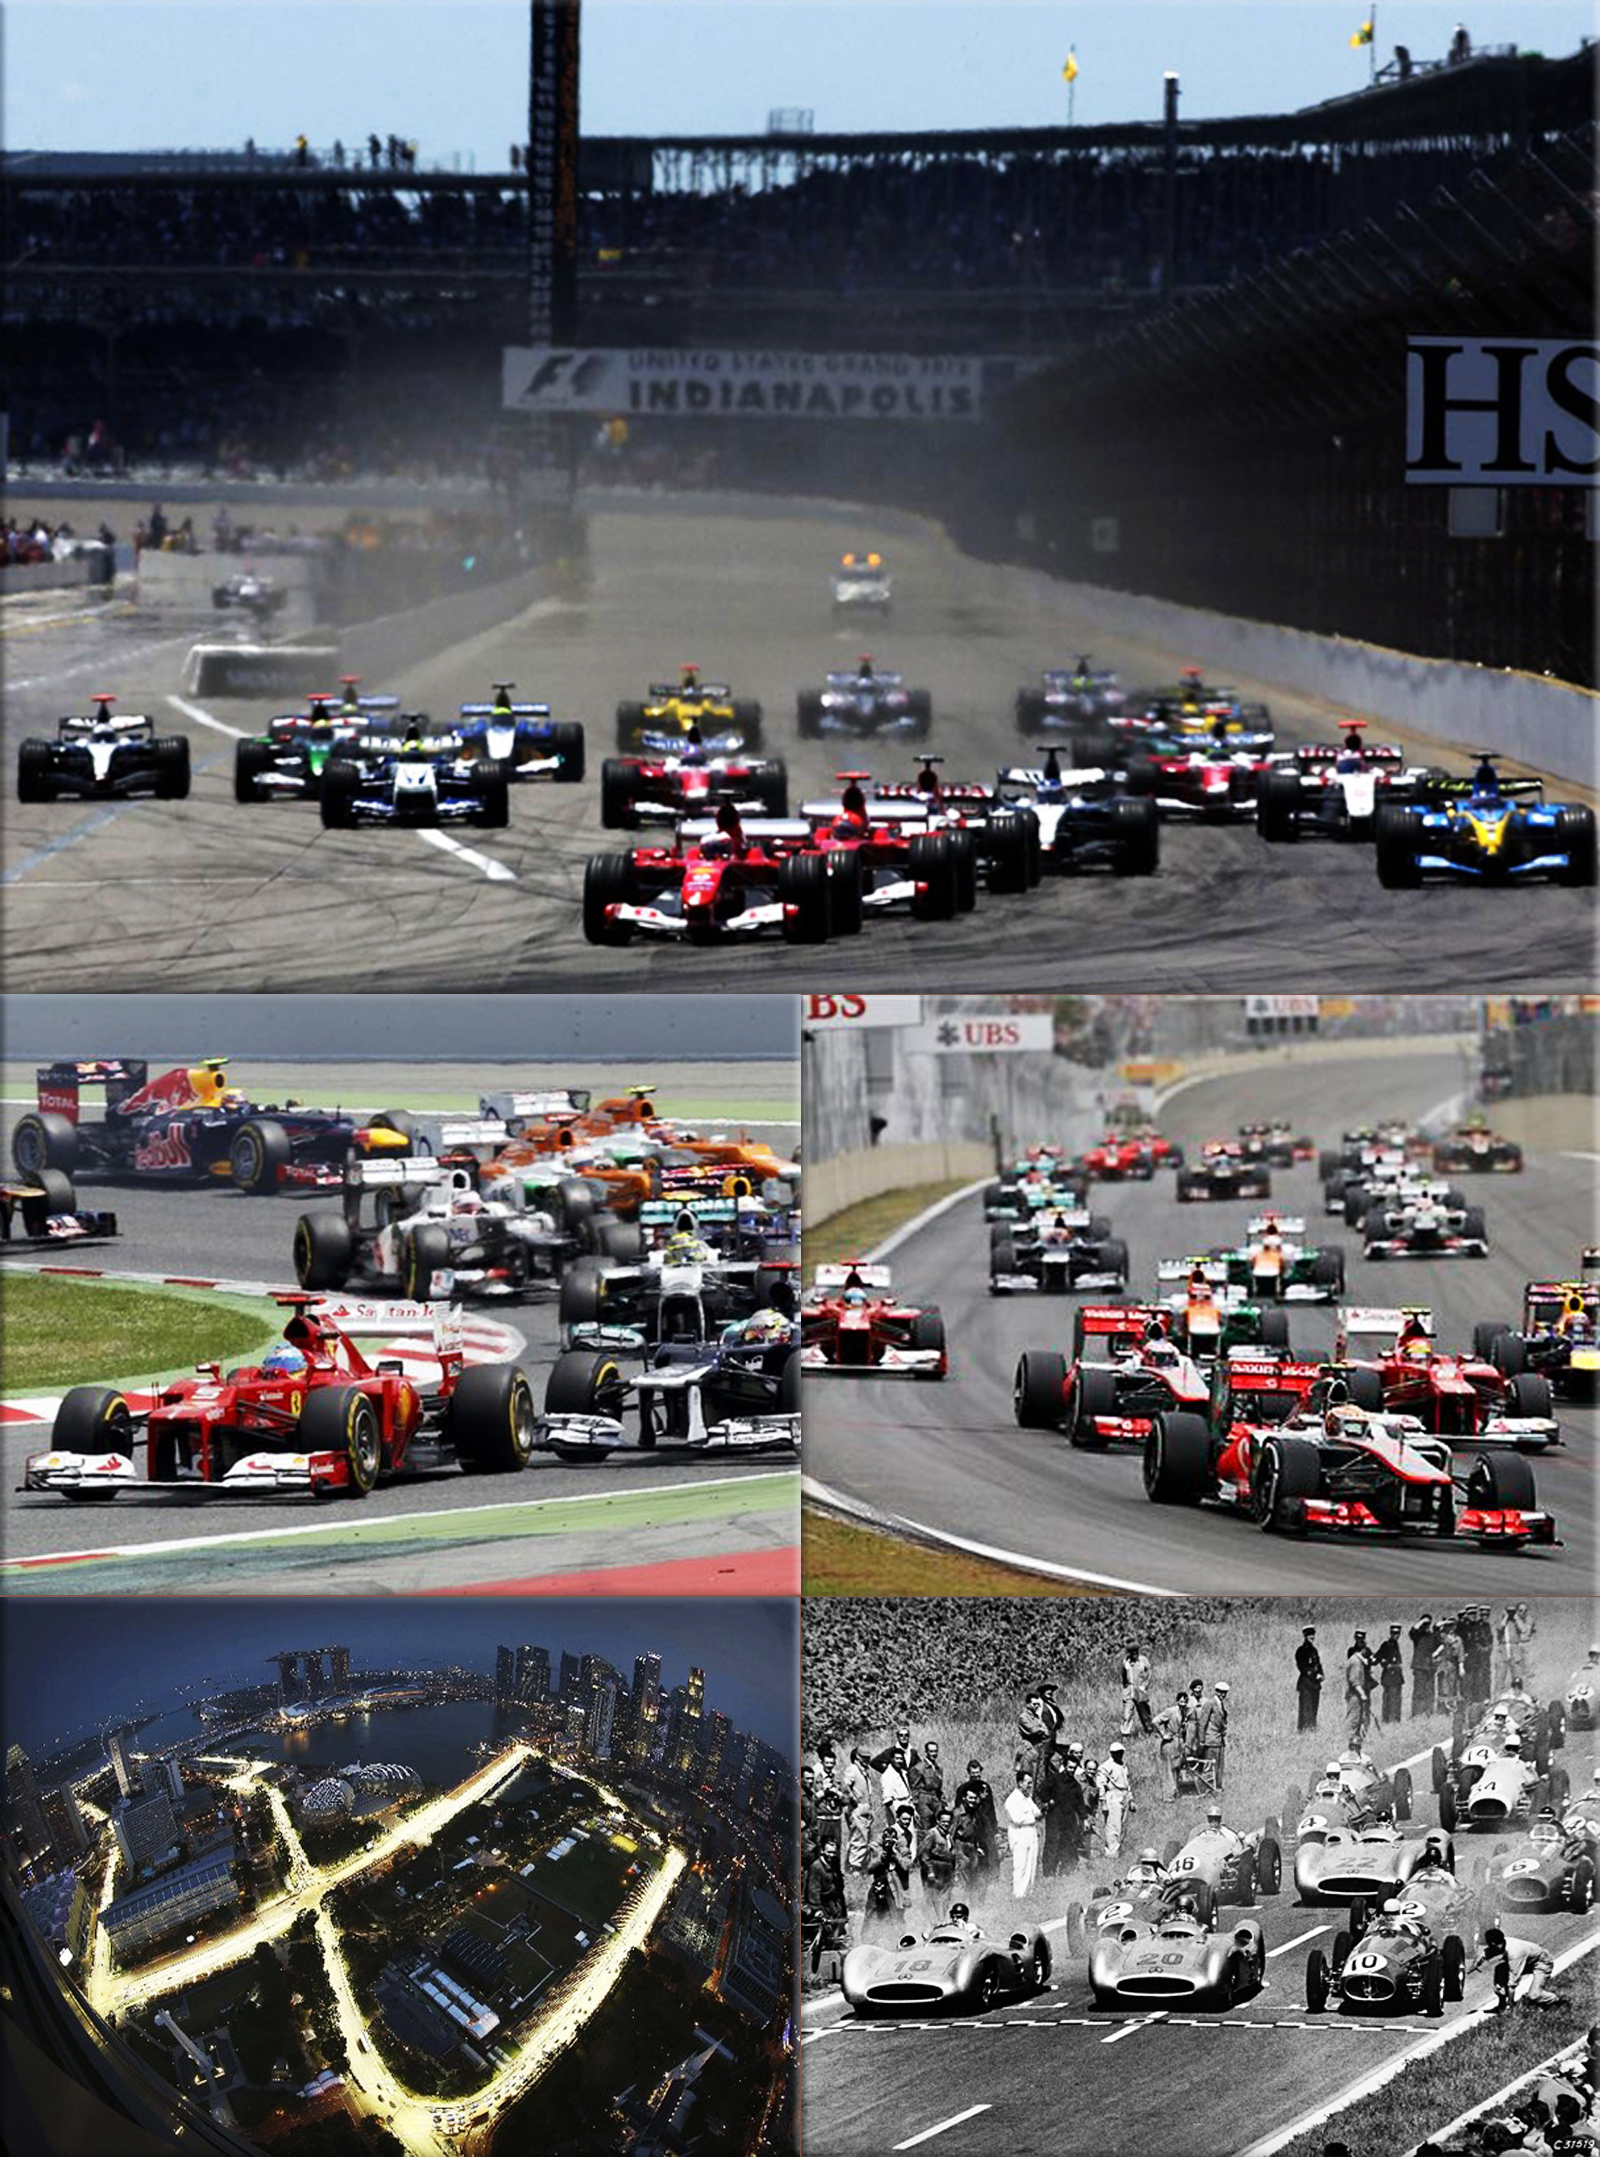 Formula One (officially - FIA Formula One World Championship): is the highest class of single-seater auto racing sanctioned by the Fédération Internationale de l'Automobile (FIA)